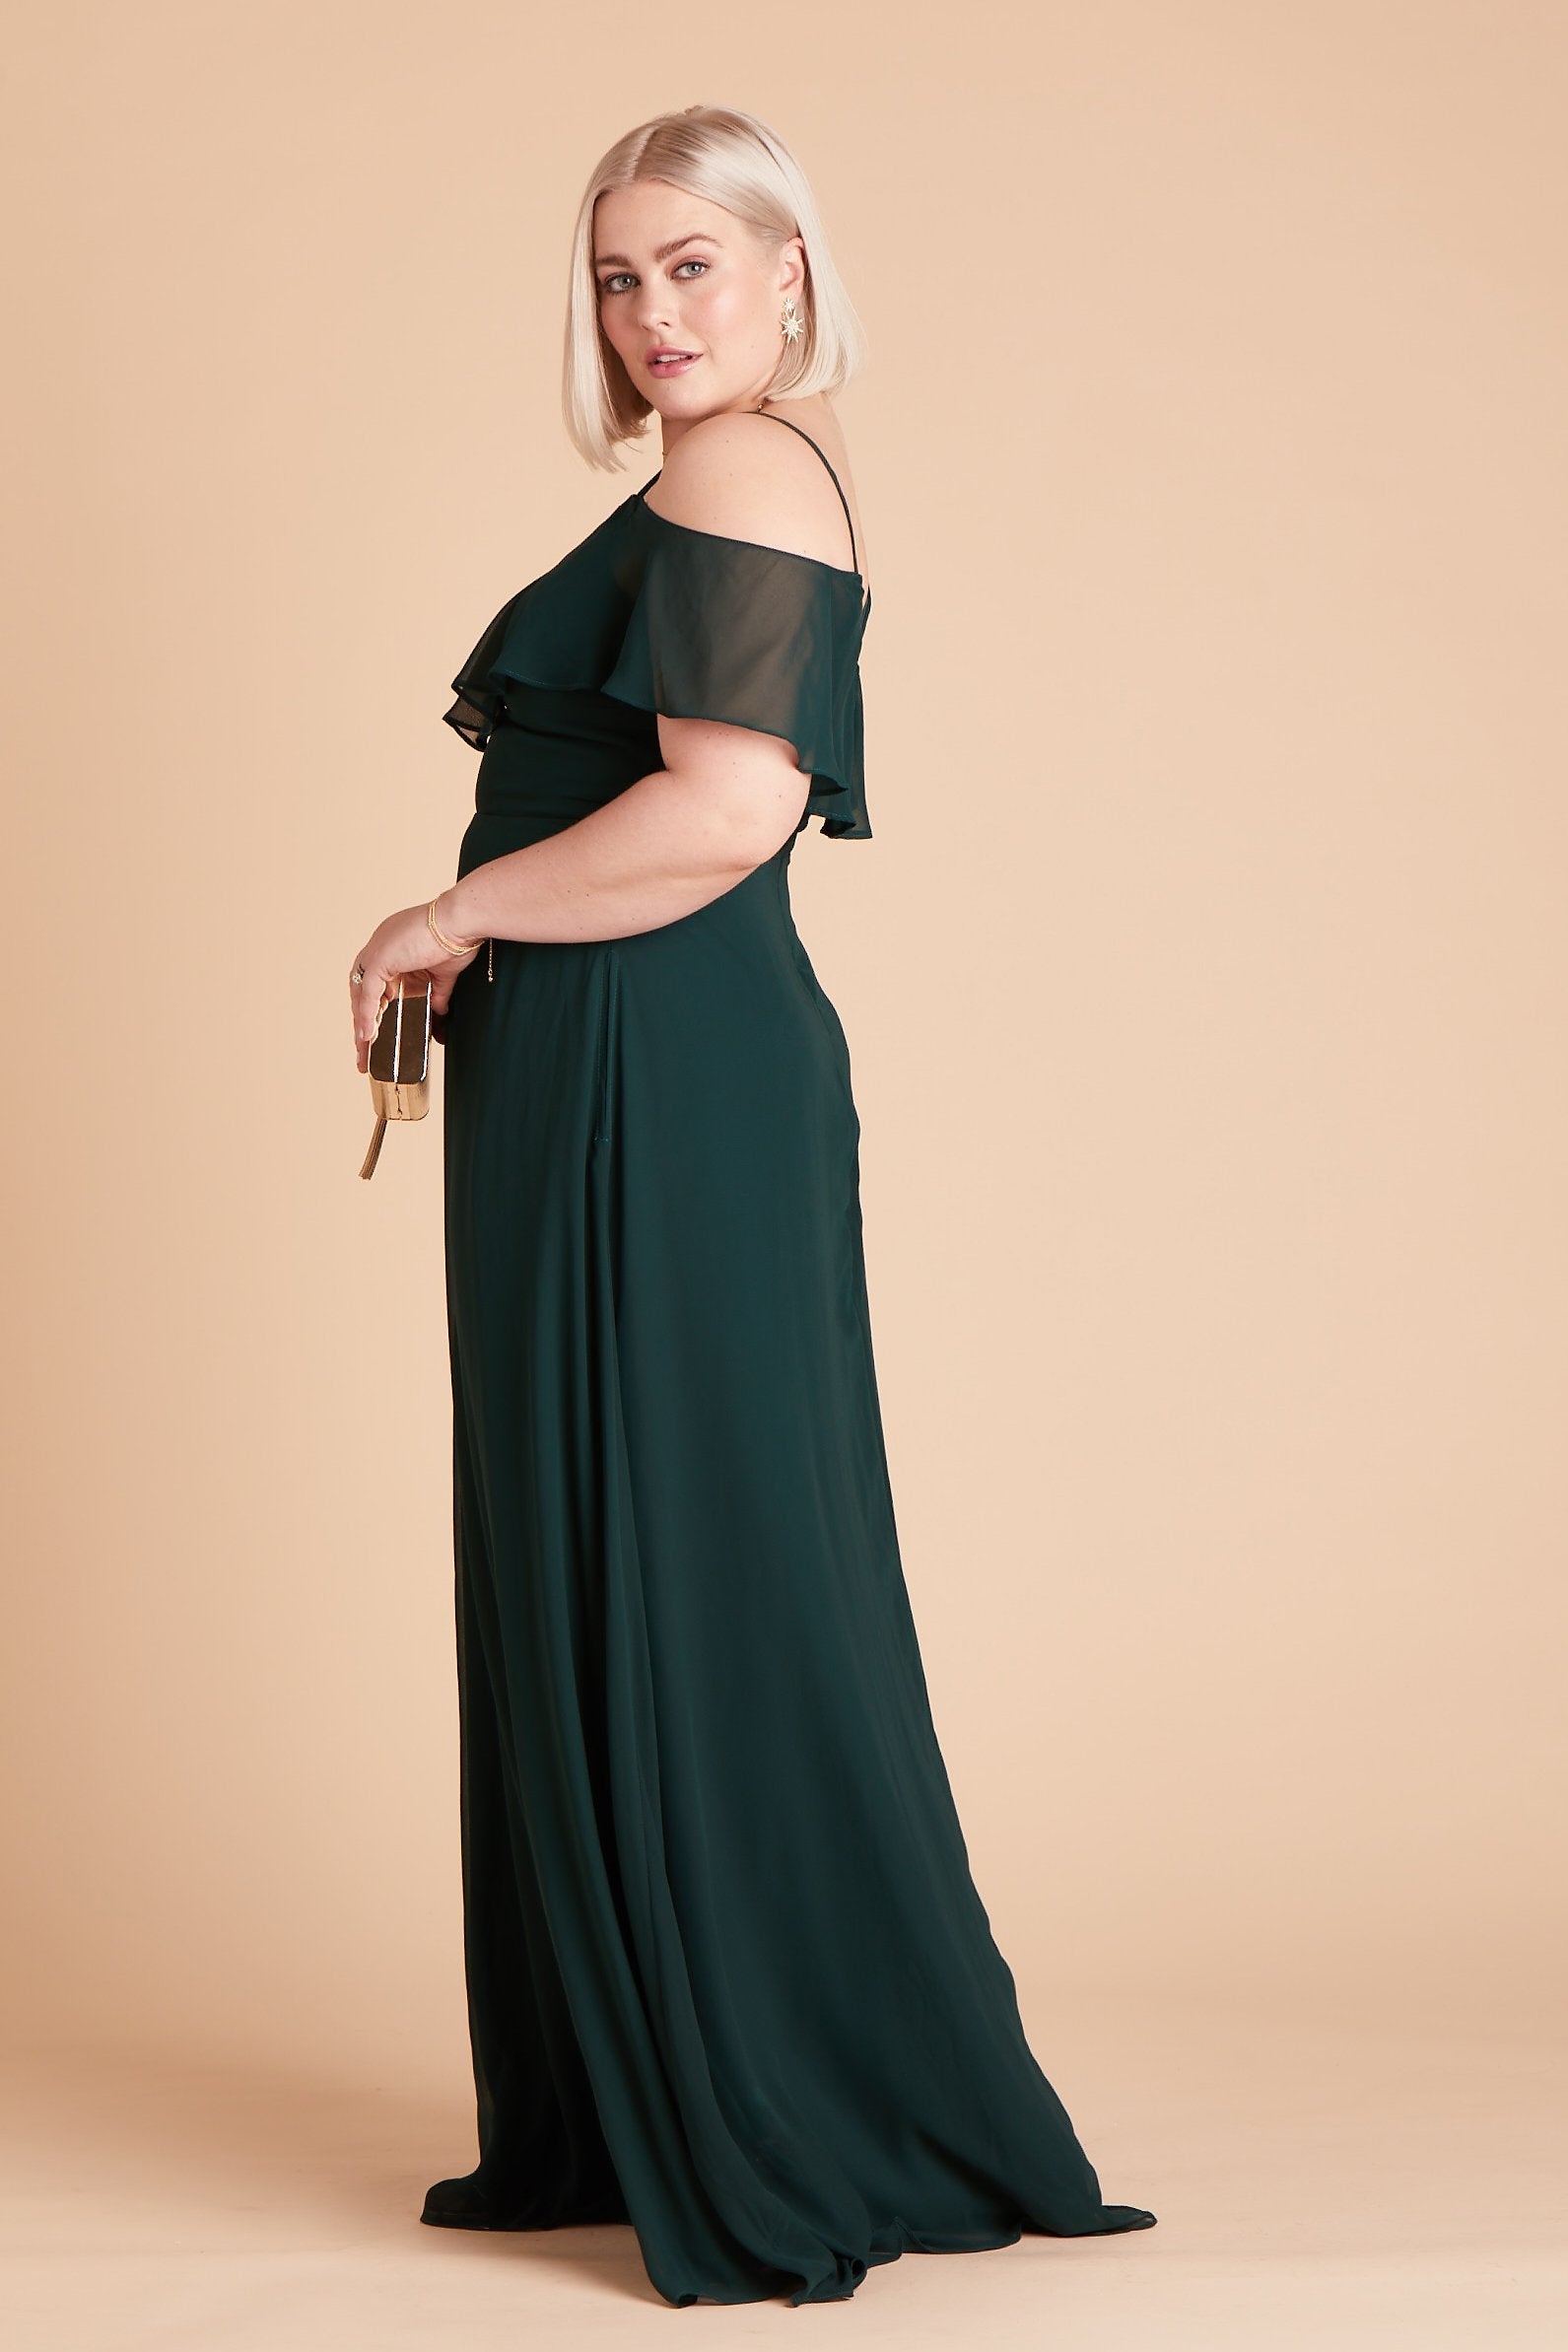 Jane convertible plus size bridesmaid dress in emerald green chiffon by Birdy Grey, side view